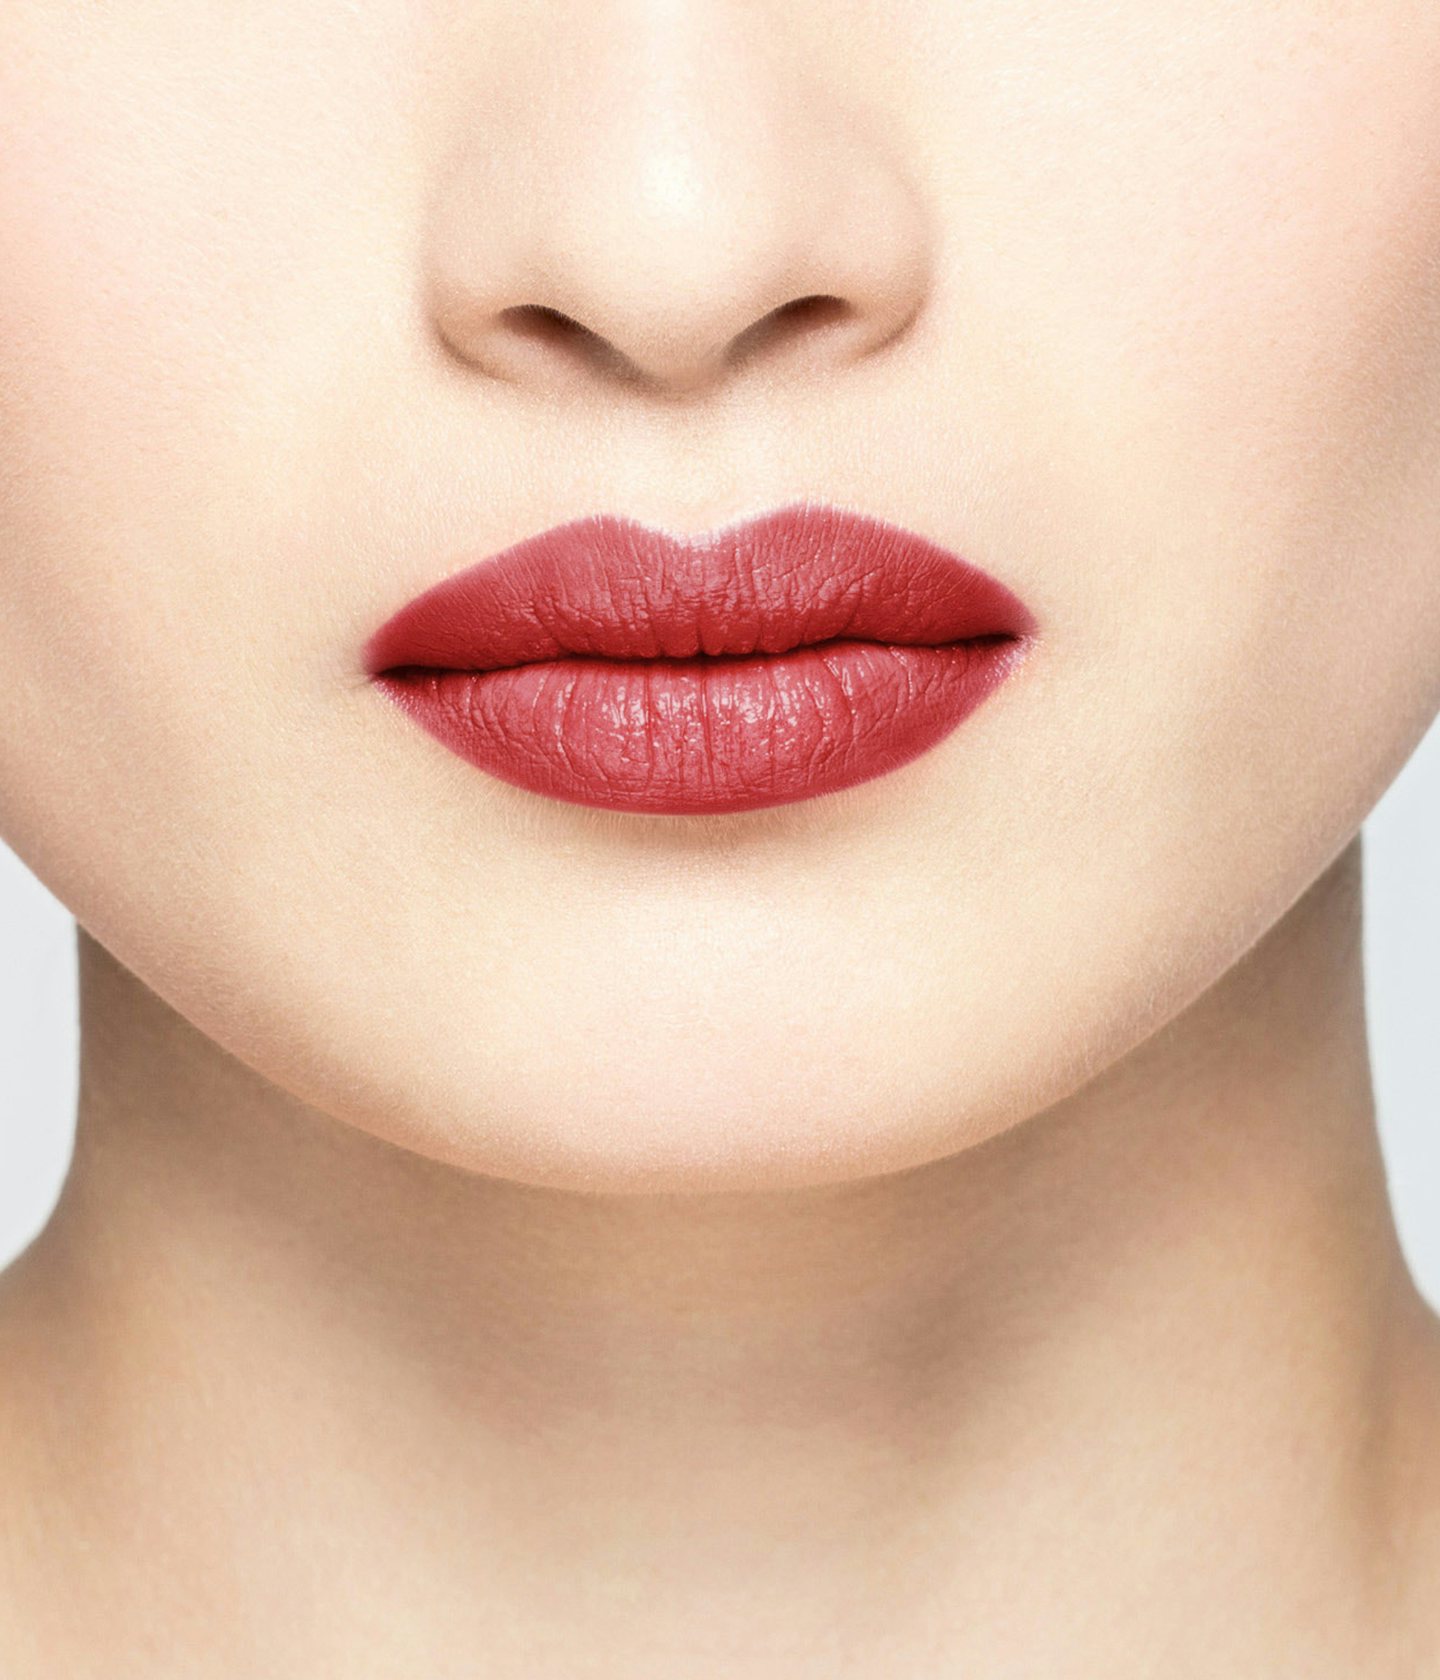 La bouche rouge Brompton Road lipstick shade on the lips of an Asian model